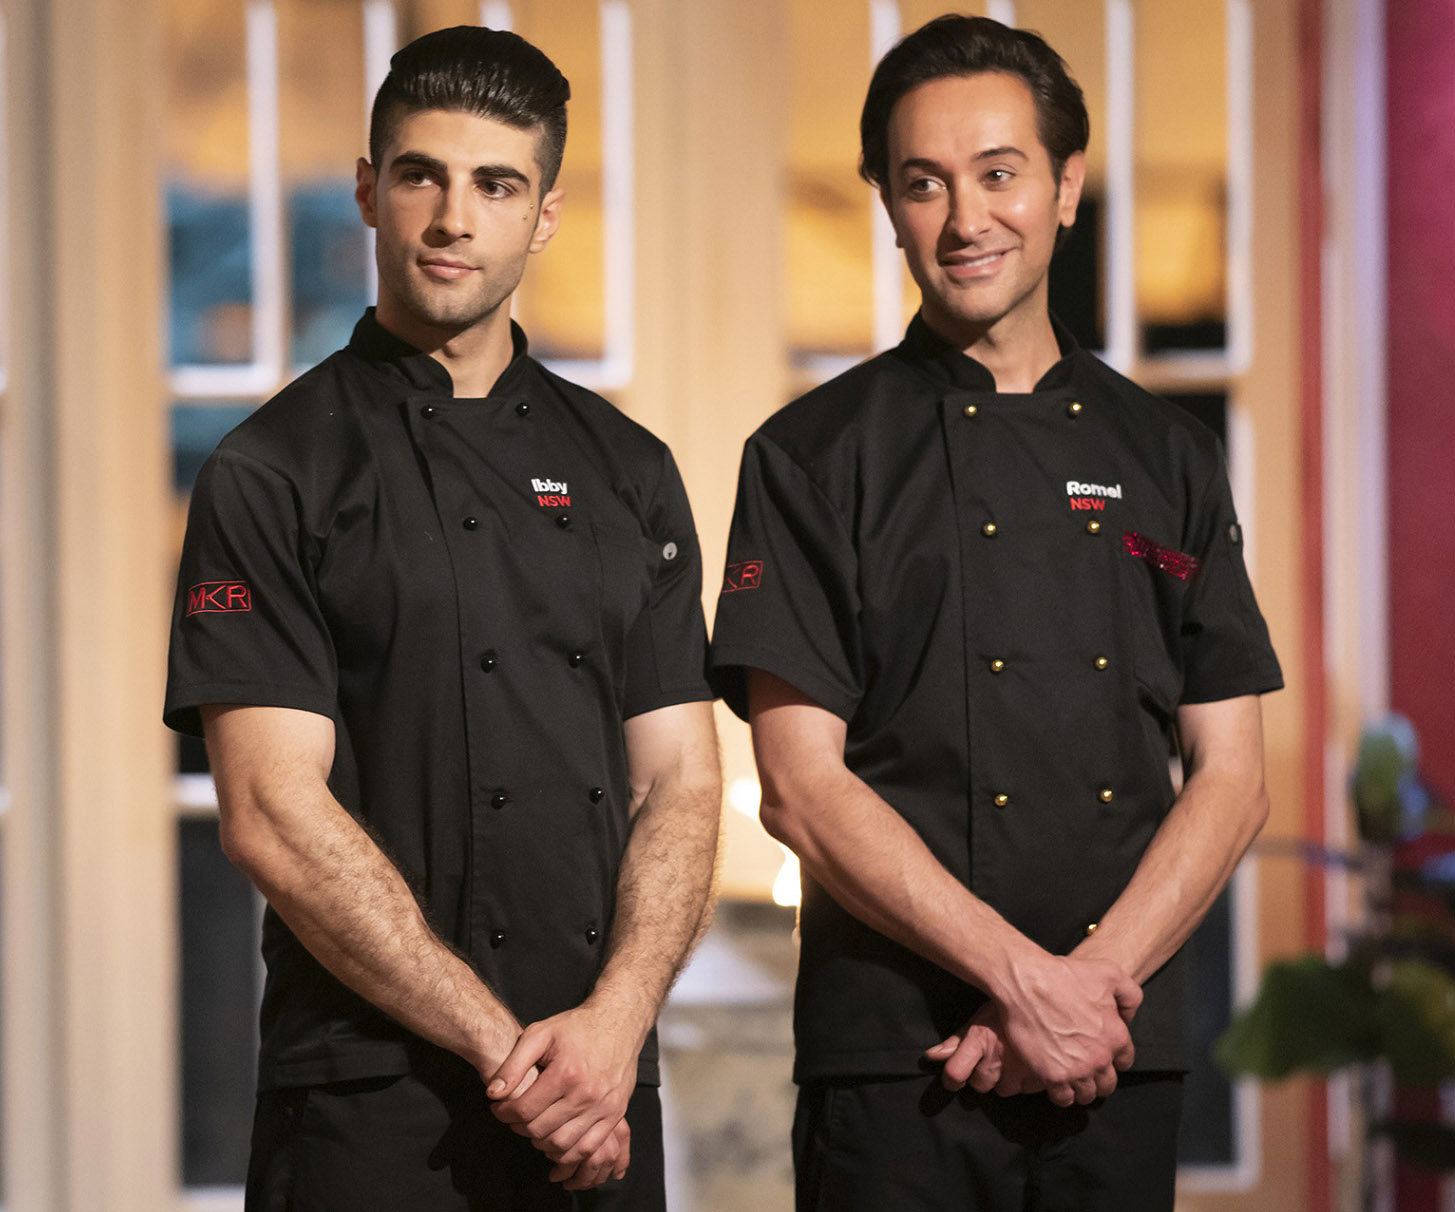 Ibby and Romel discuss their shock My Kitchen Rules loss and address speculation the final was rigged